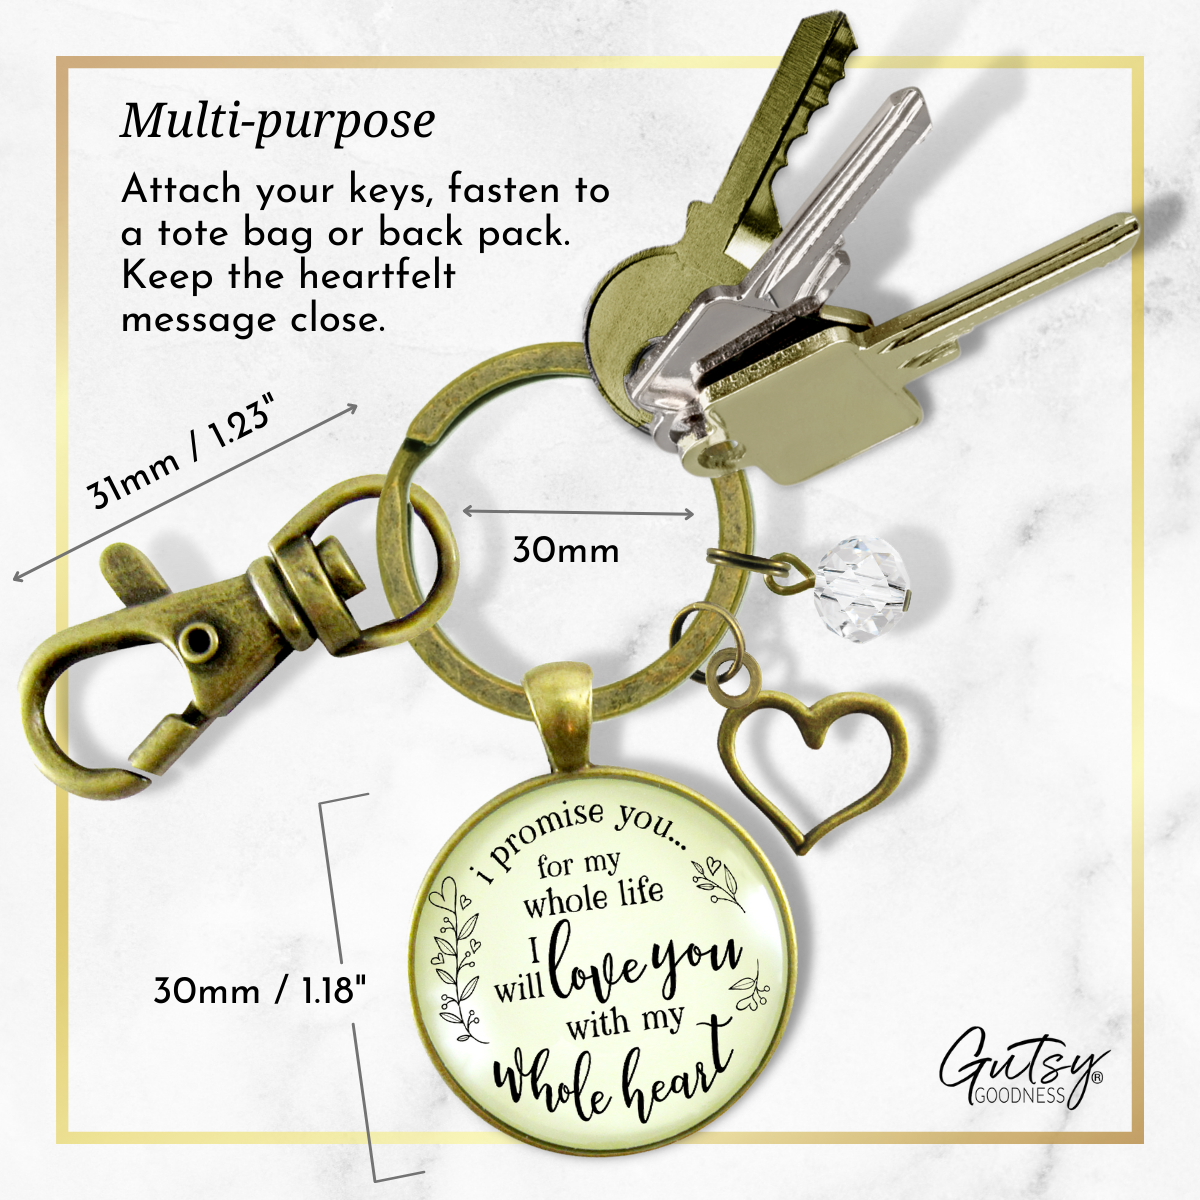 Love My Wife Keychain I Promise You For My Whole Life Gift From Husband Wedding Day Jewelry - Gutsy Goodness Handmade Jewelry;Love My Wife Keychain I Promise You For My Whole Life Gift From Husband Wedding Day Jewelry - Gutsy Goodness Handmade Jewelry Gifts